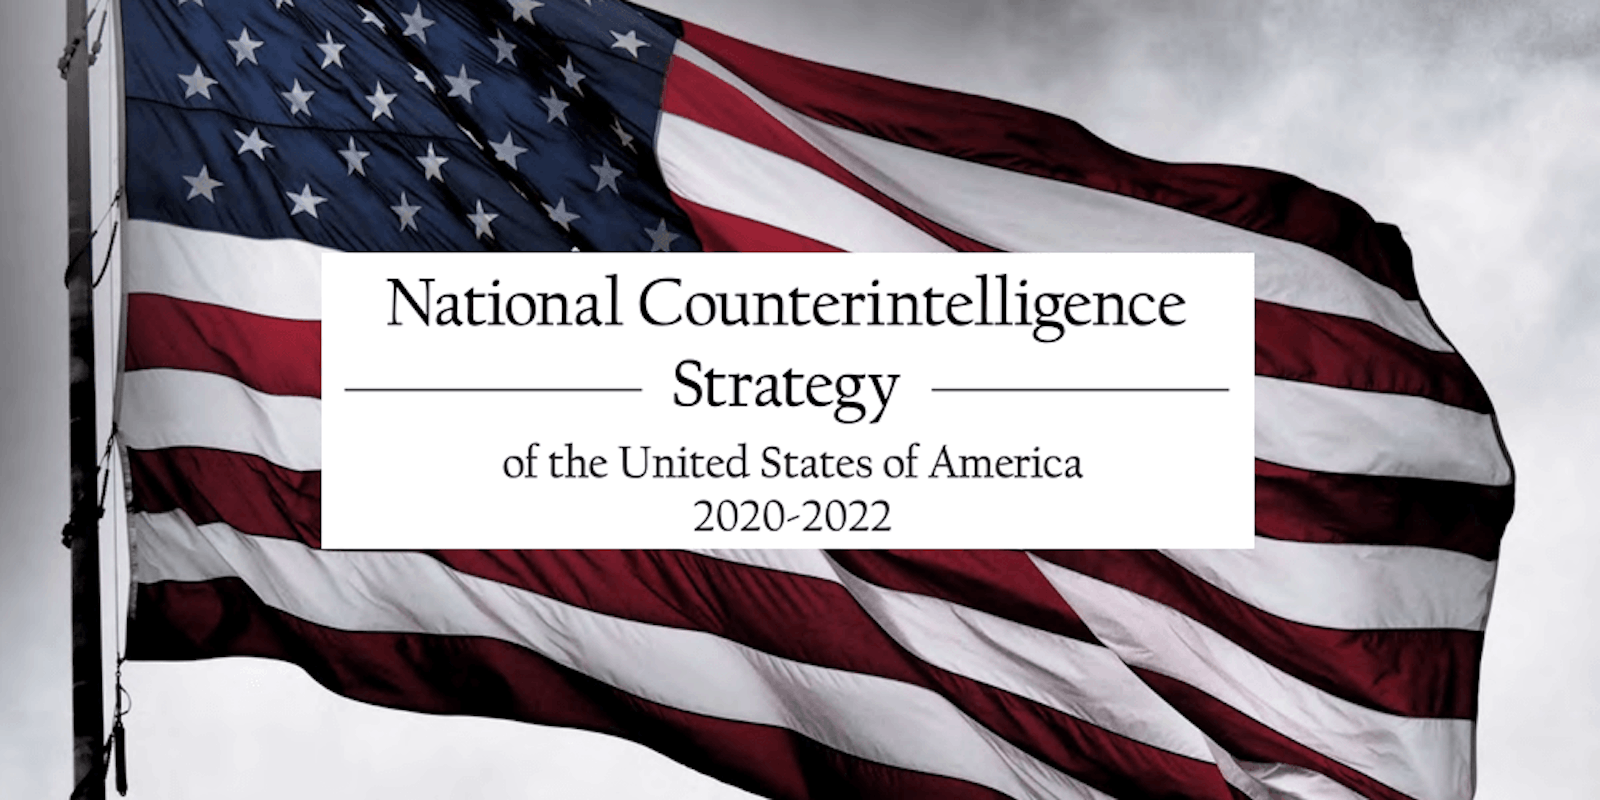 The National Counterintelligence Strategy for 2020 to 2022